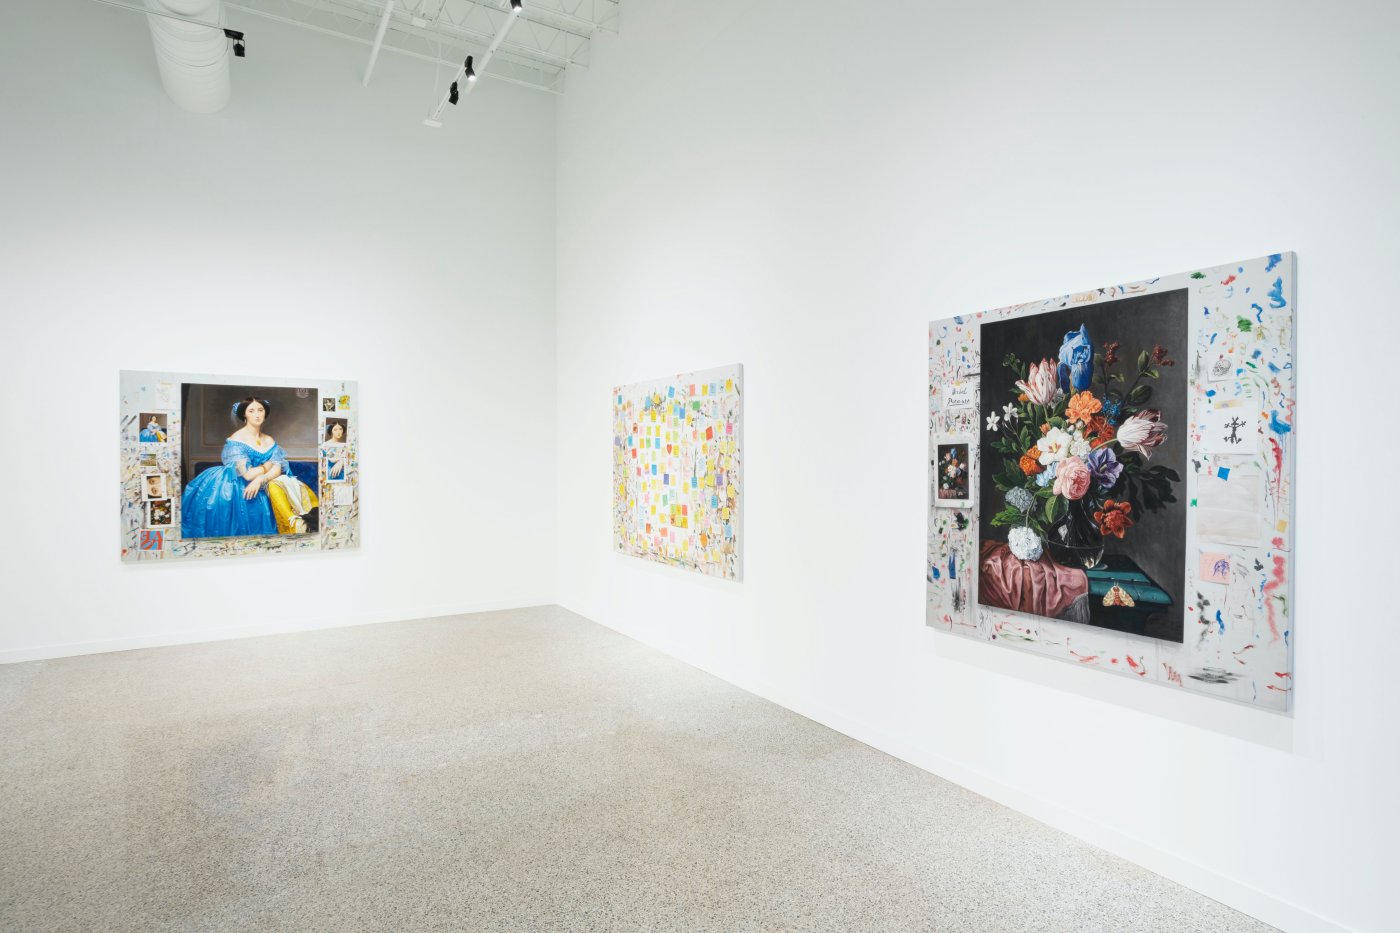 Installation image for Marc Dennis: Love in the Time of Corona, at GAVLAK